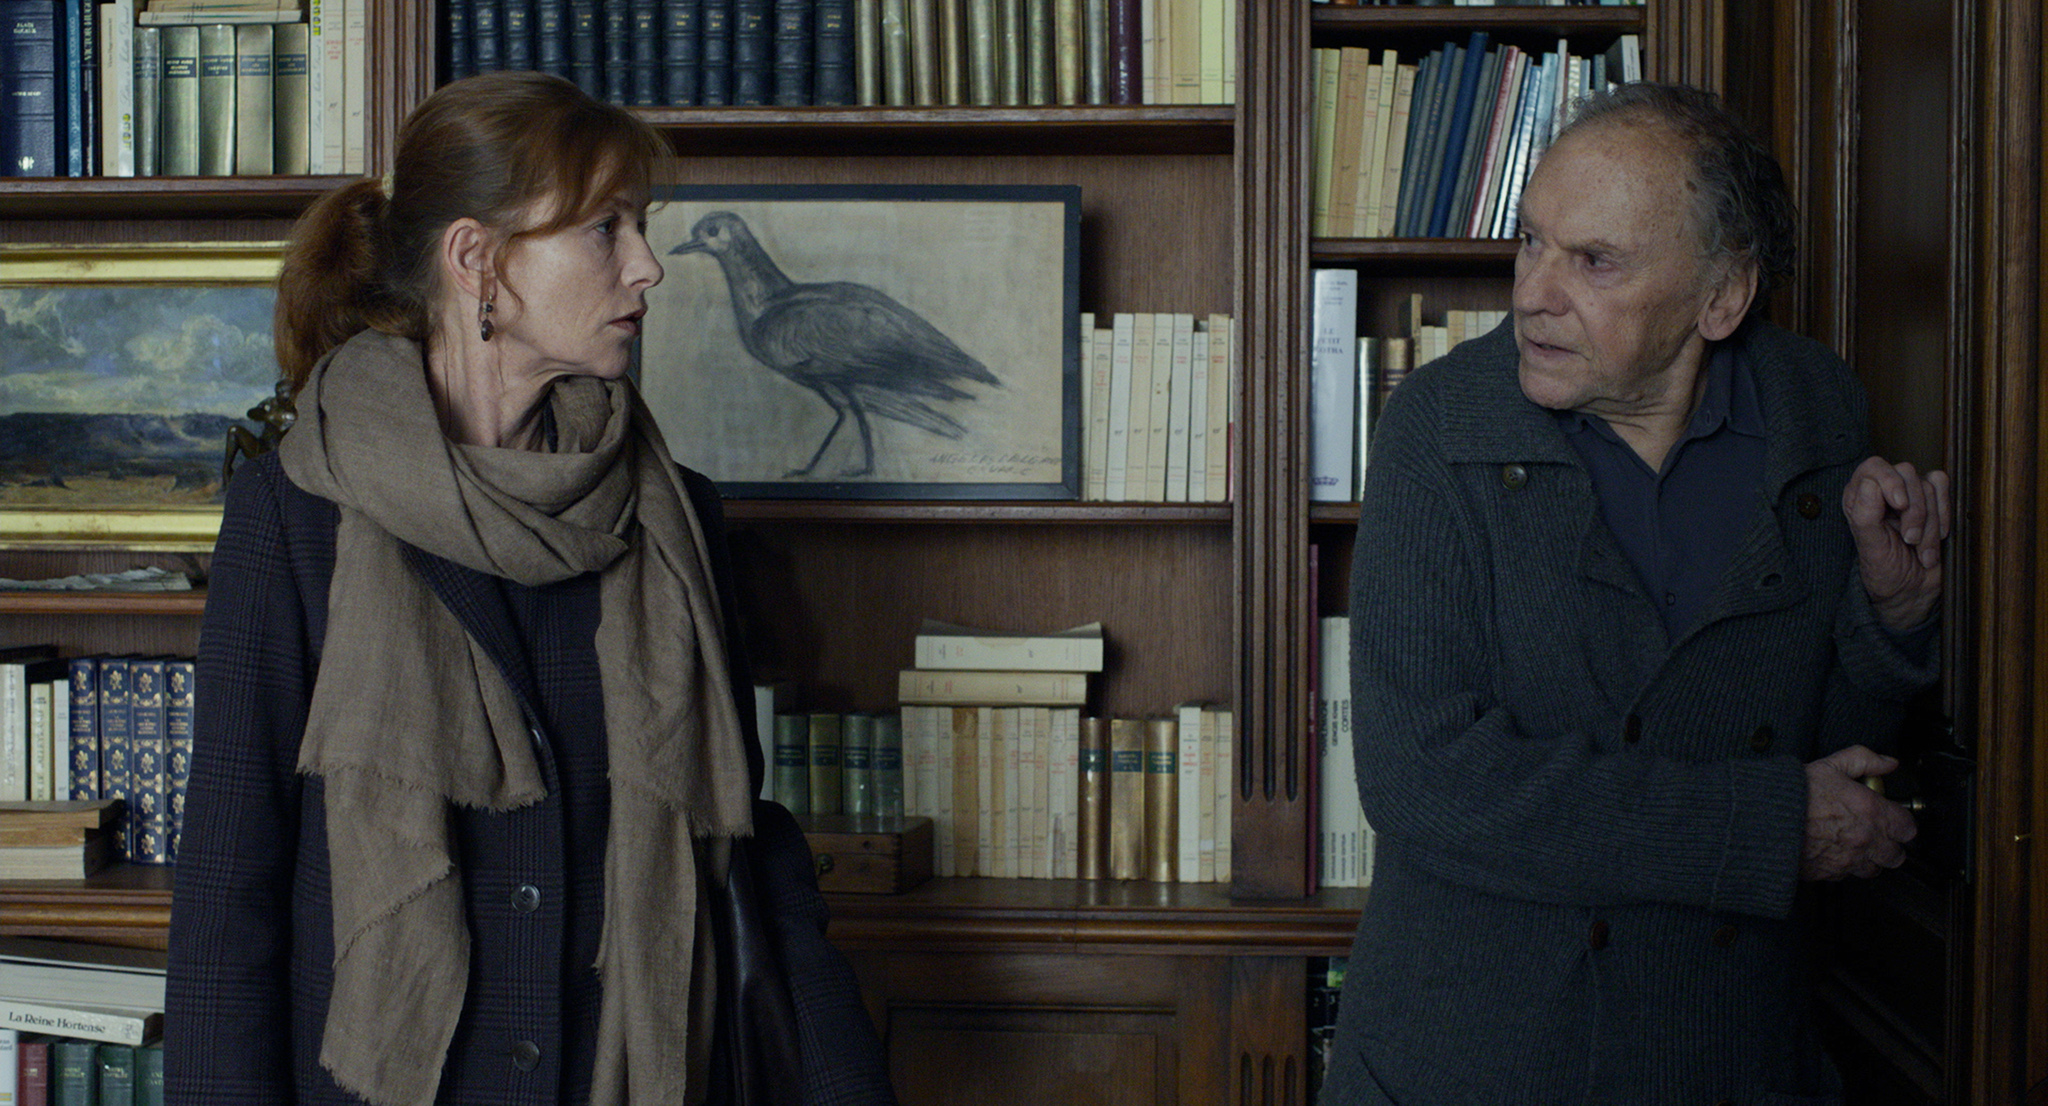 Still of Isabelle Huppert and Jean-Louis Trintignant in Amour (2012)